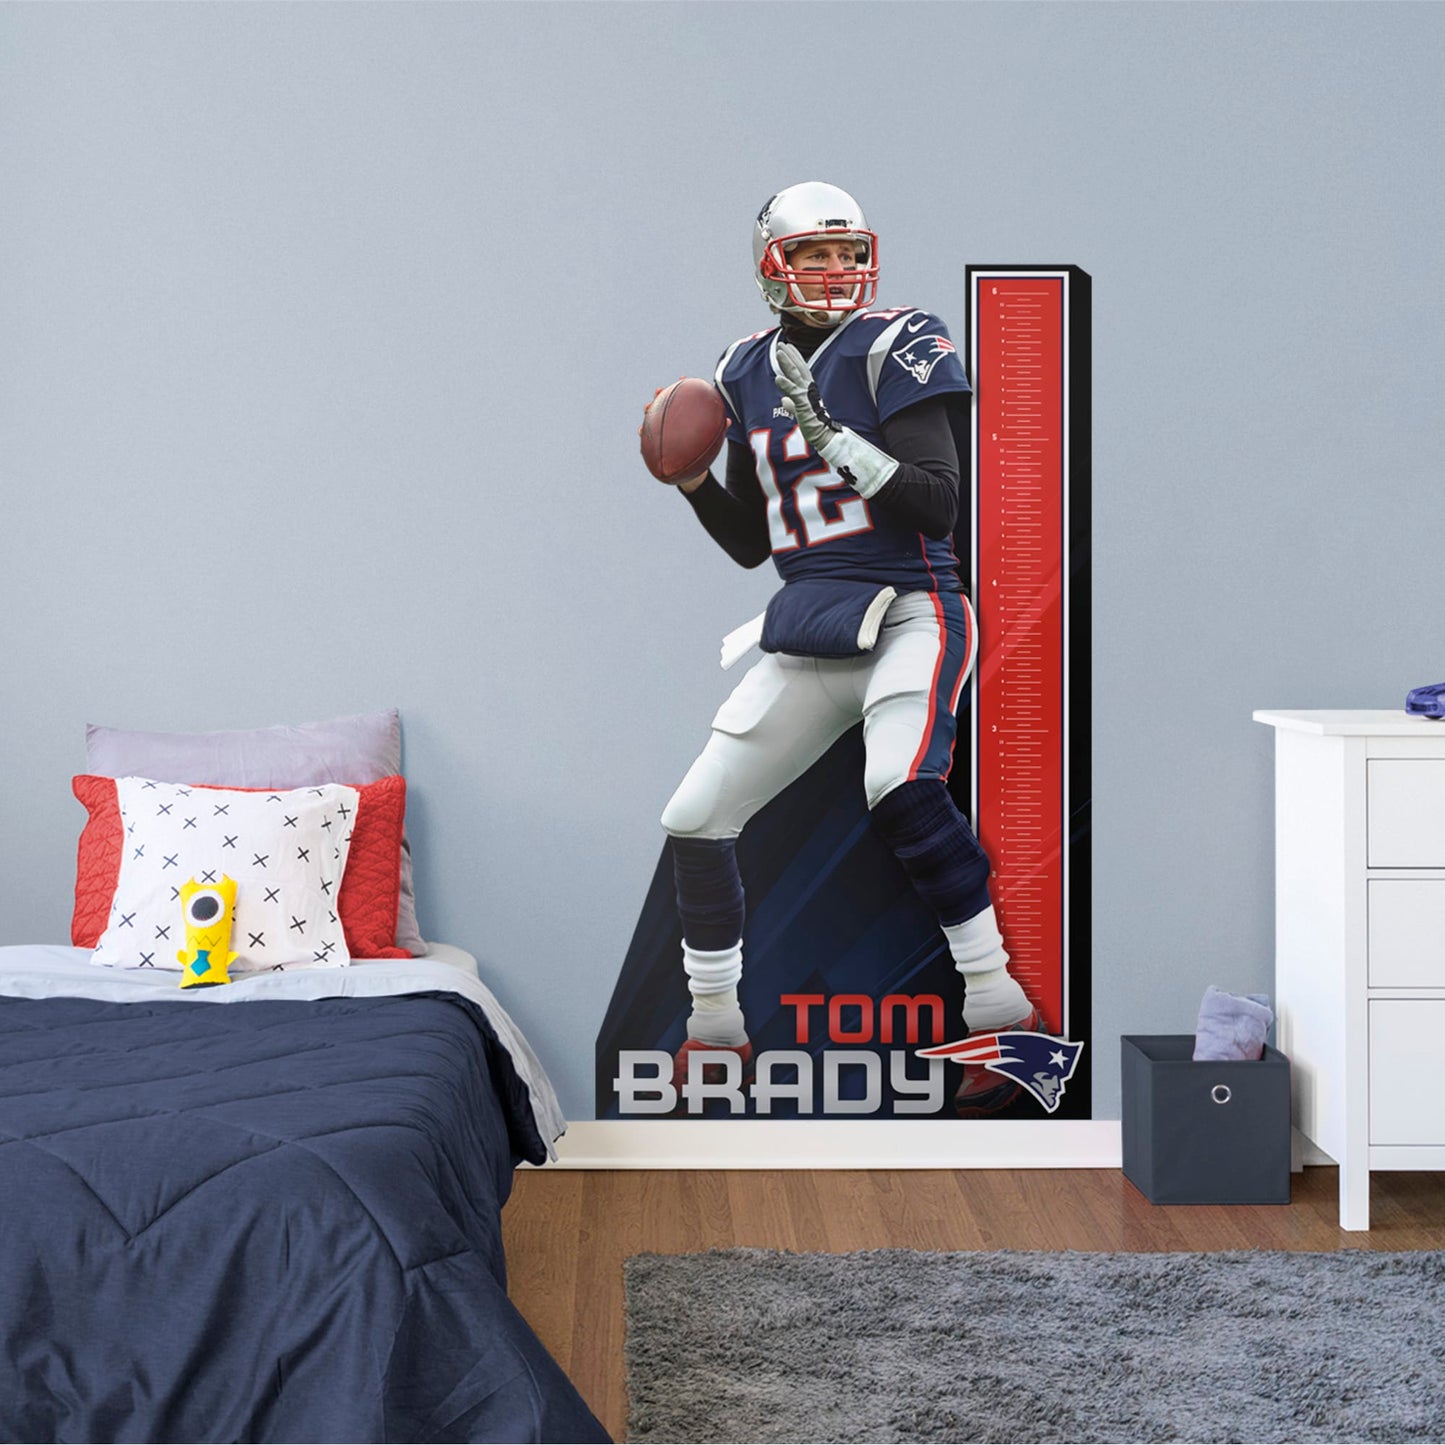 Tom Brady: Growth Chart - Officially Licensed NFL Removable Wall Decal